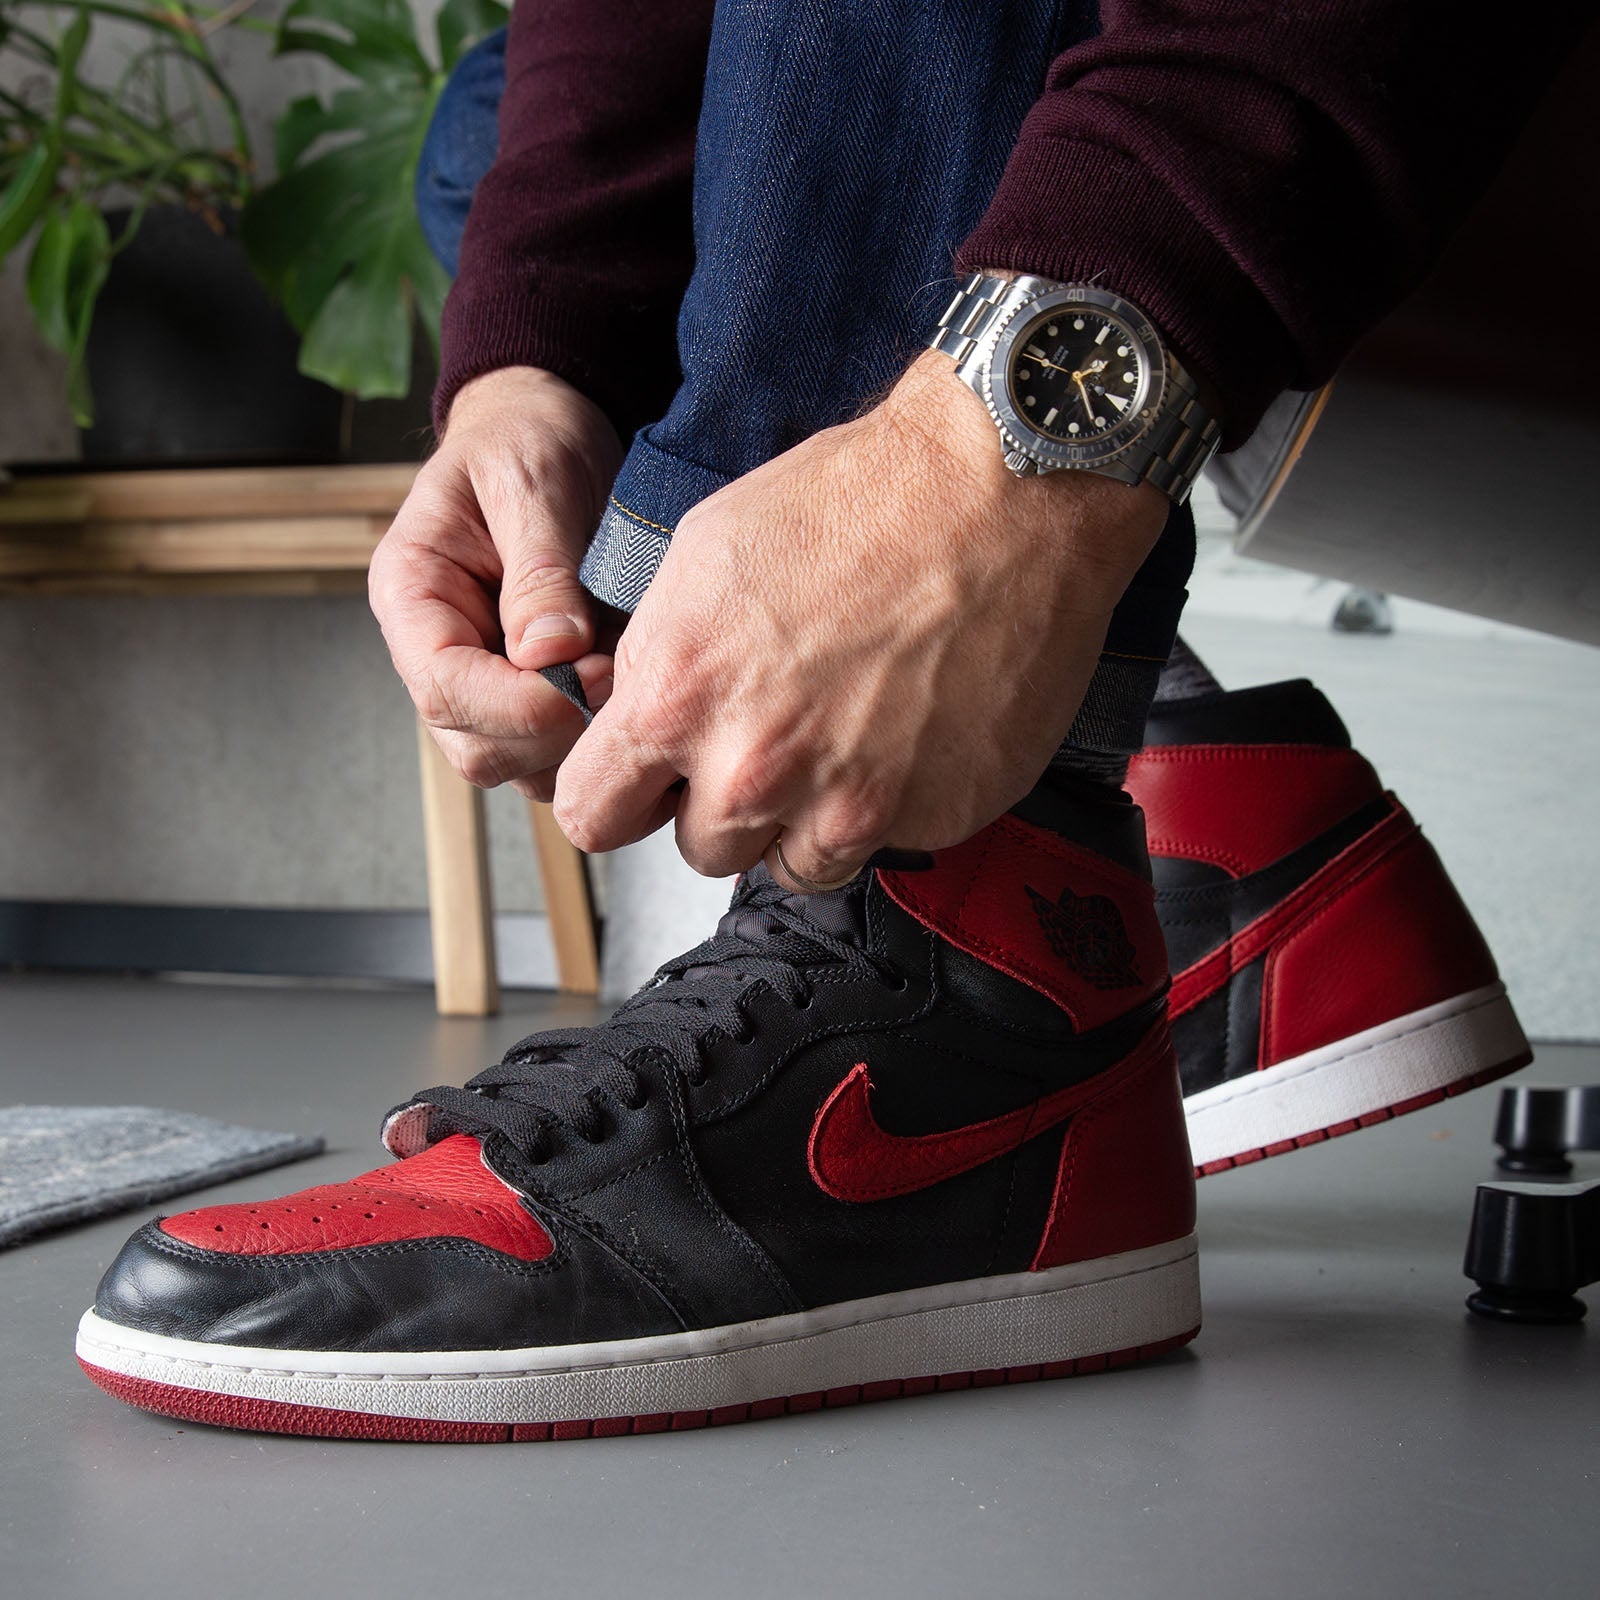 Bleeding Black and Red: Examining the Iconic Air Jordan 1 ‘Bred’ and its Relevance in Style Culture